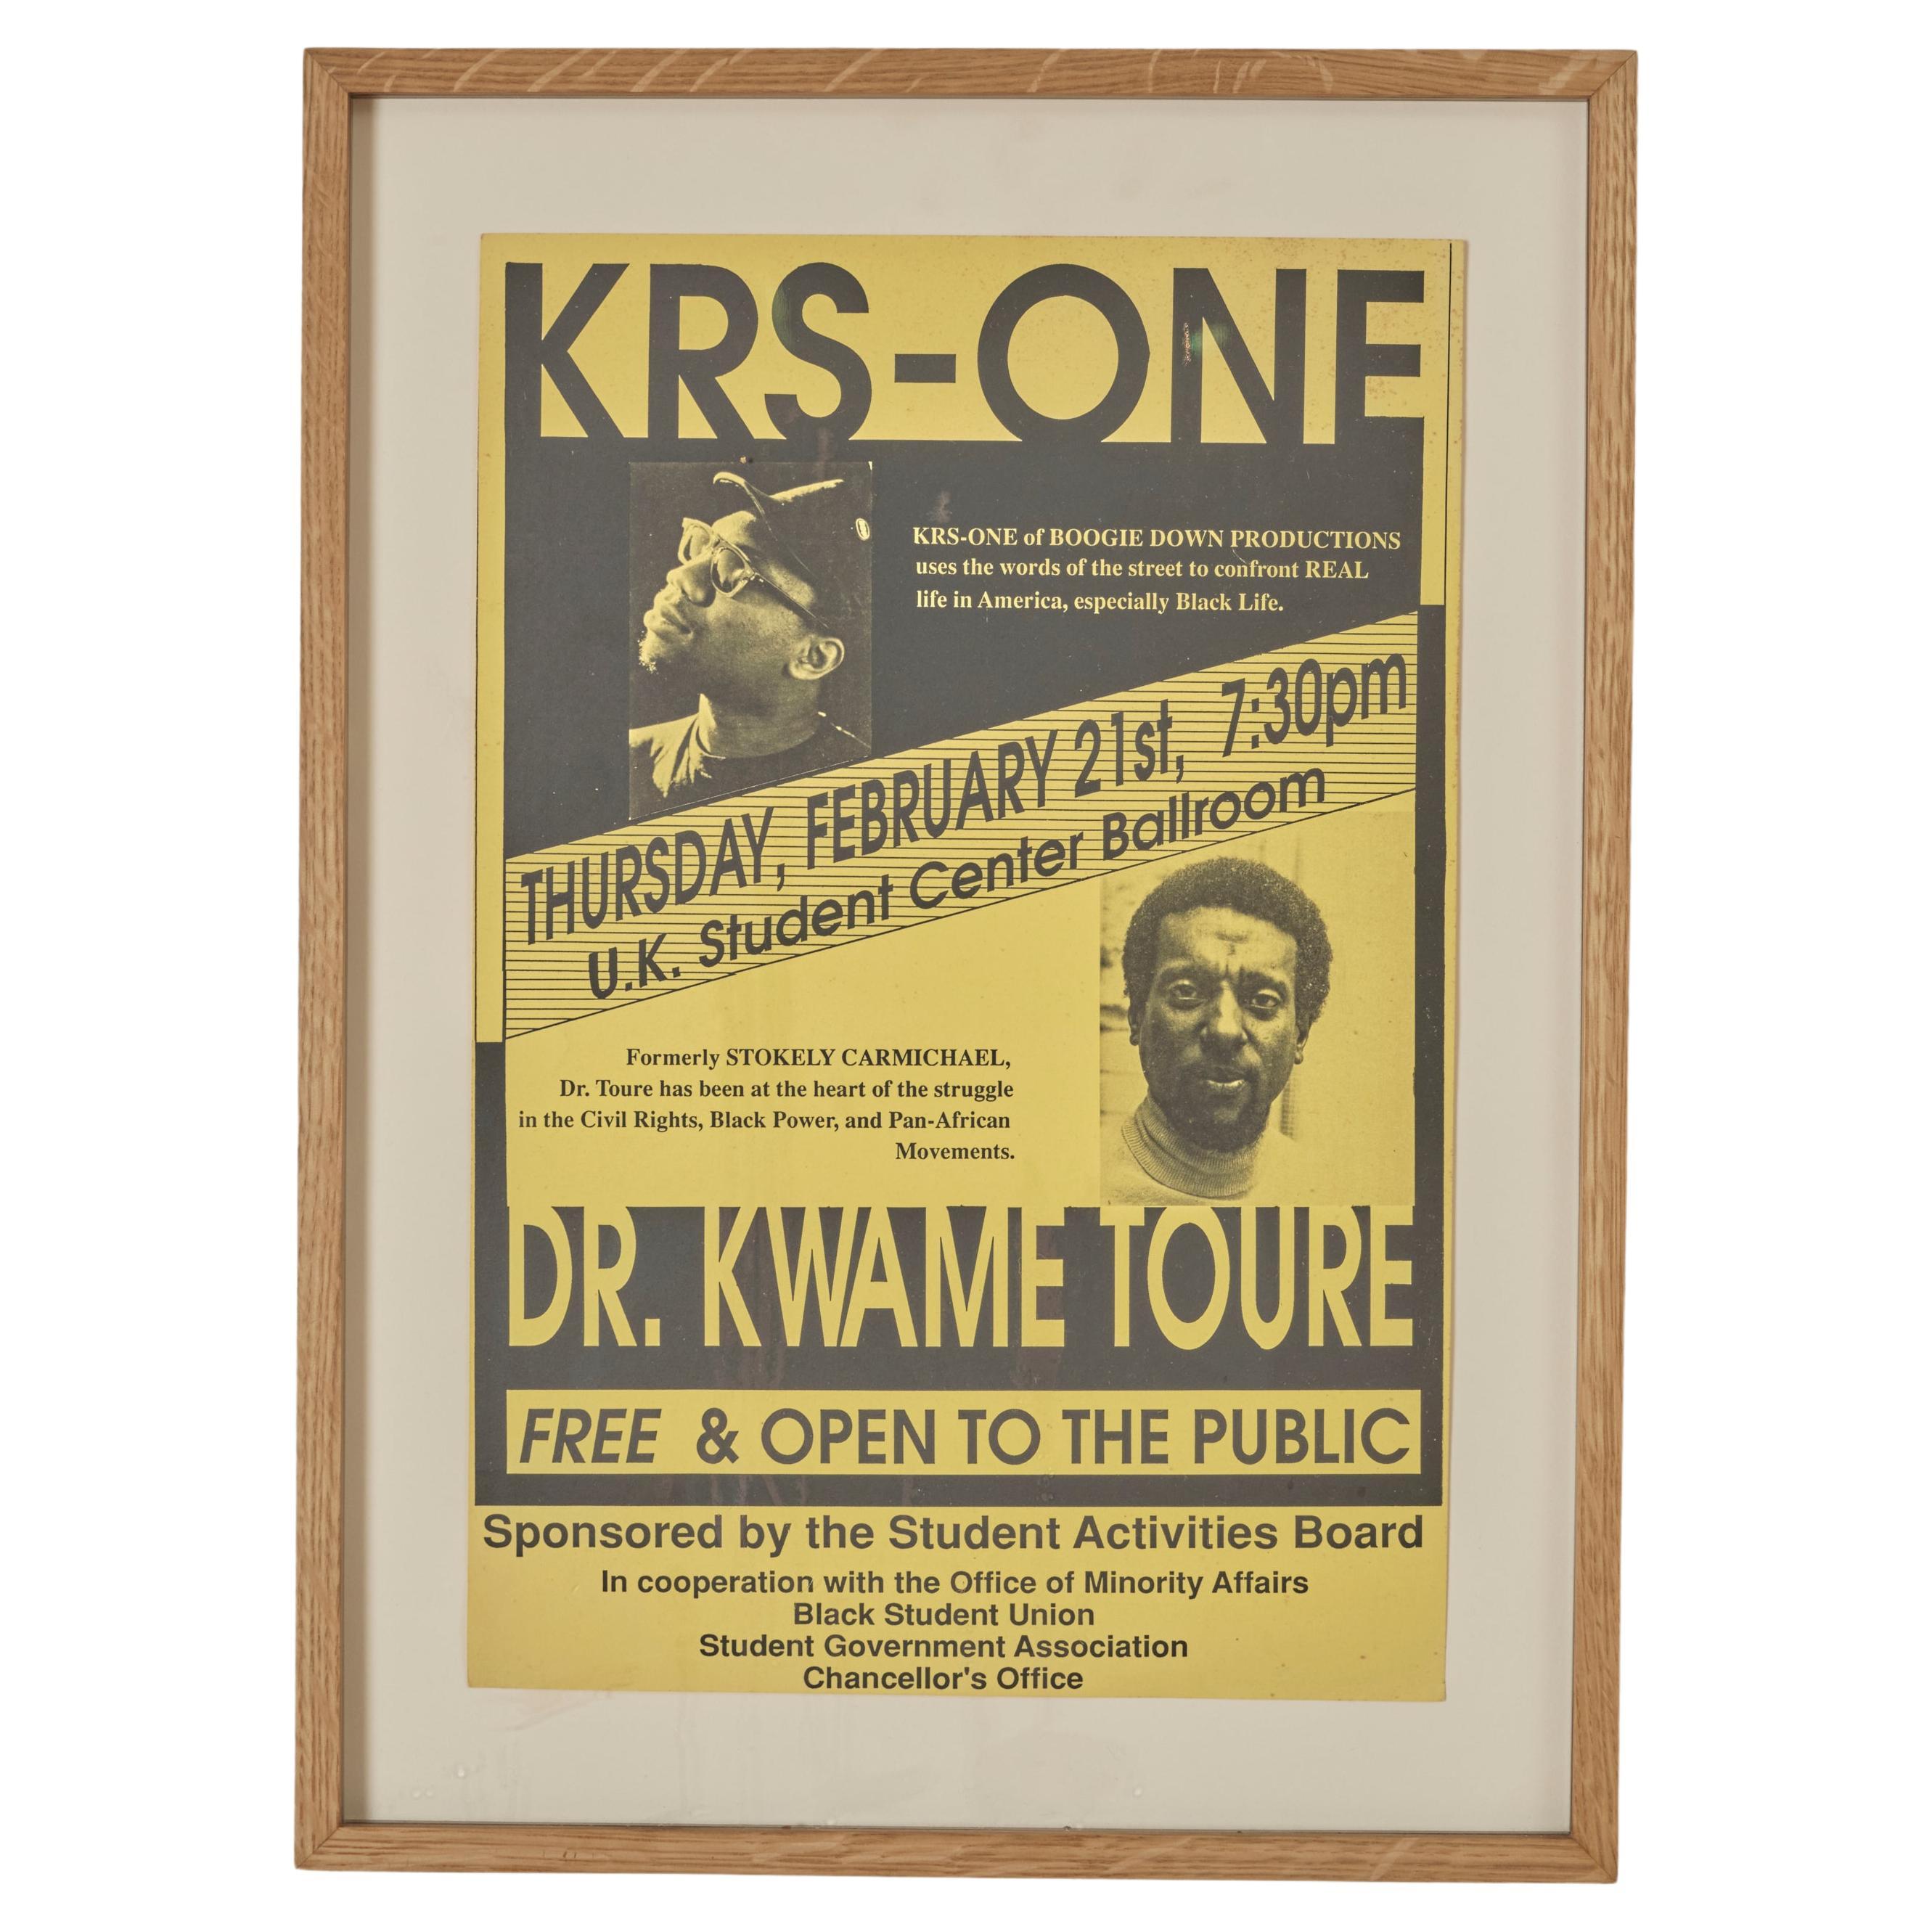 KRS - ONE and Dr.Kwame Ture Event Poster For Sale